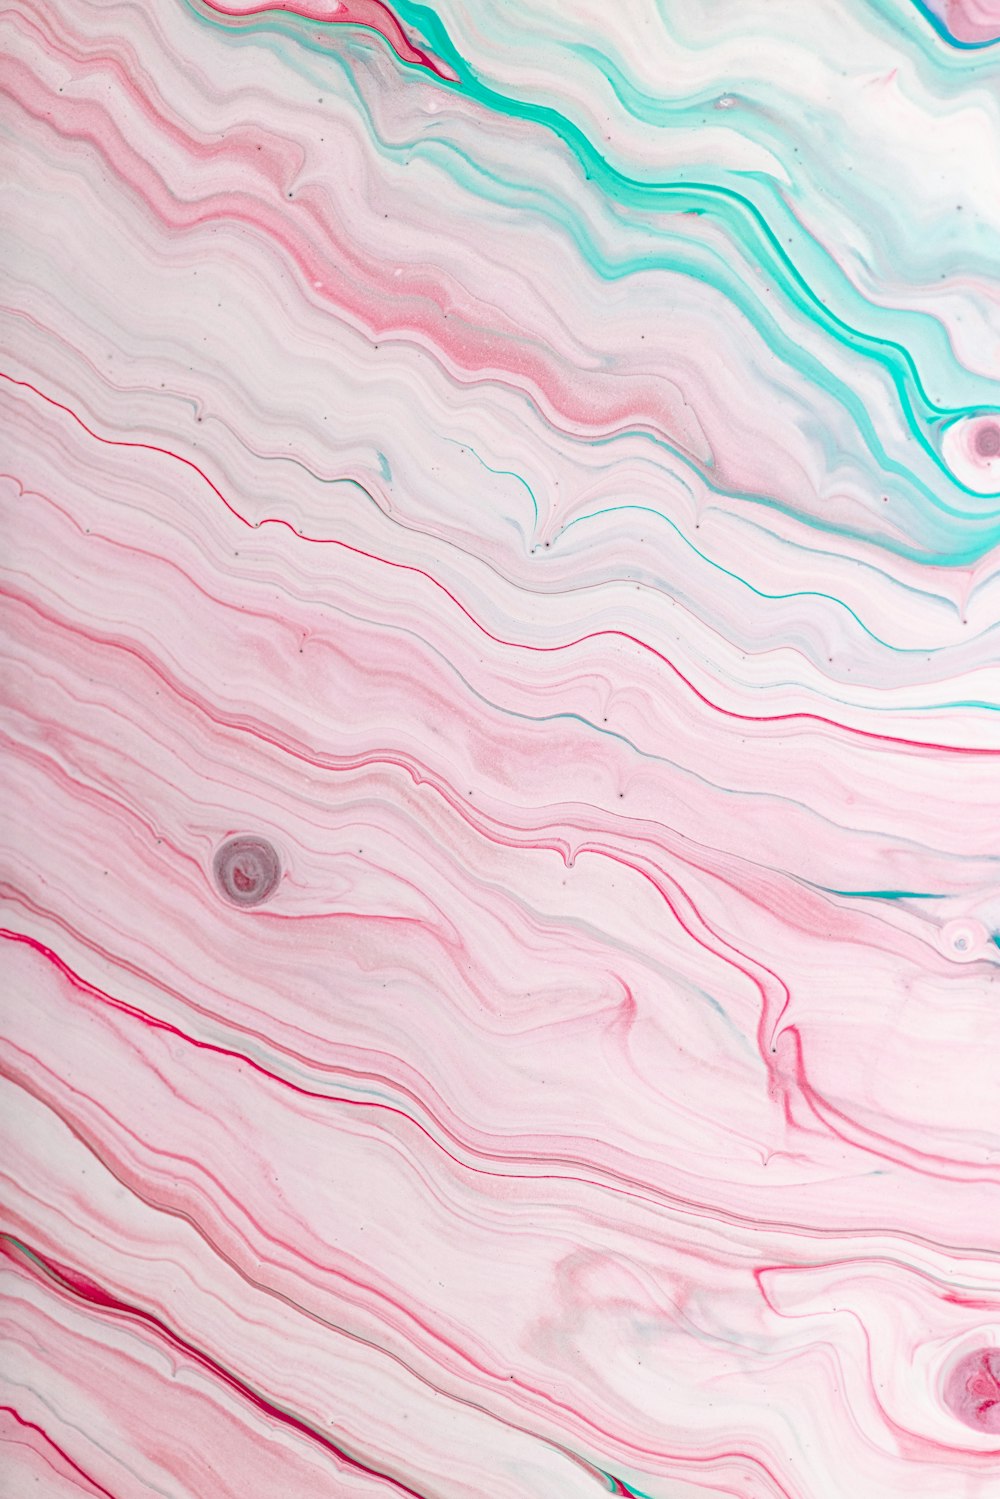 a pink and blue abstract painting with circles